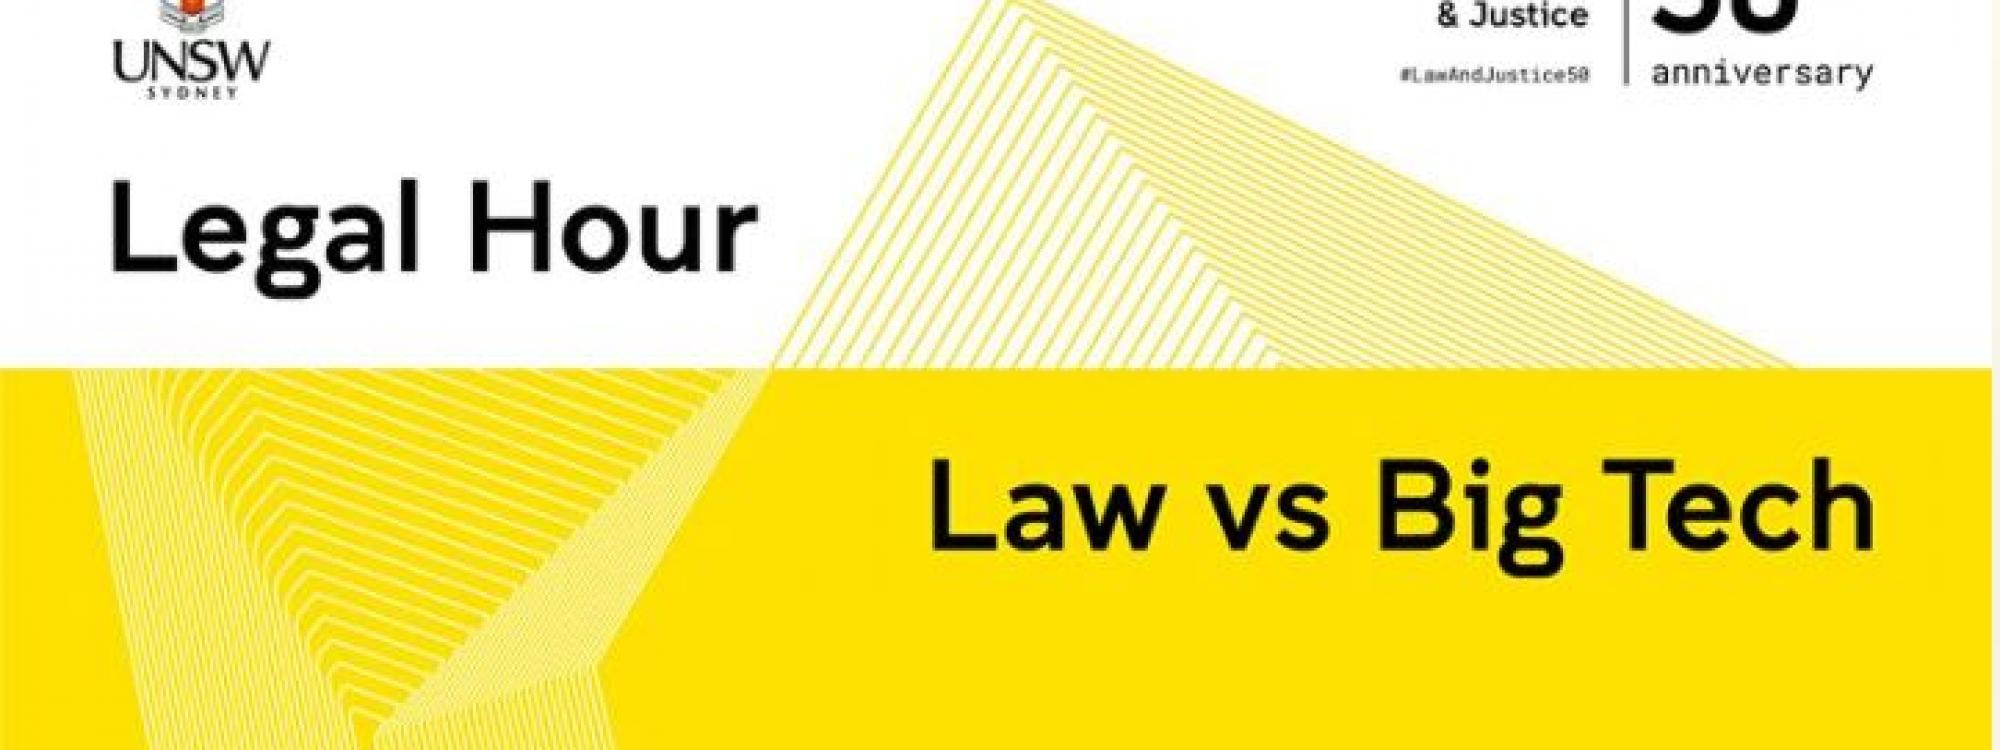 UNSW branding with Legal Hour on it